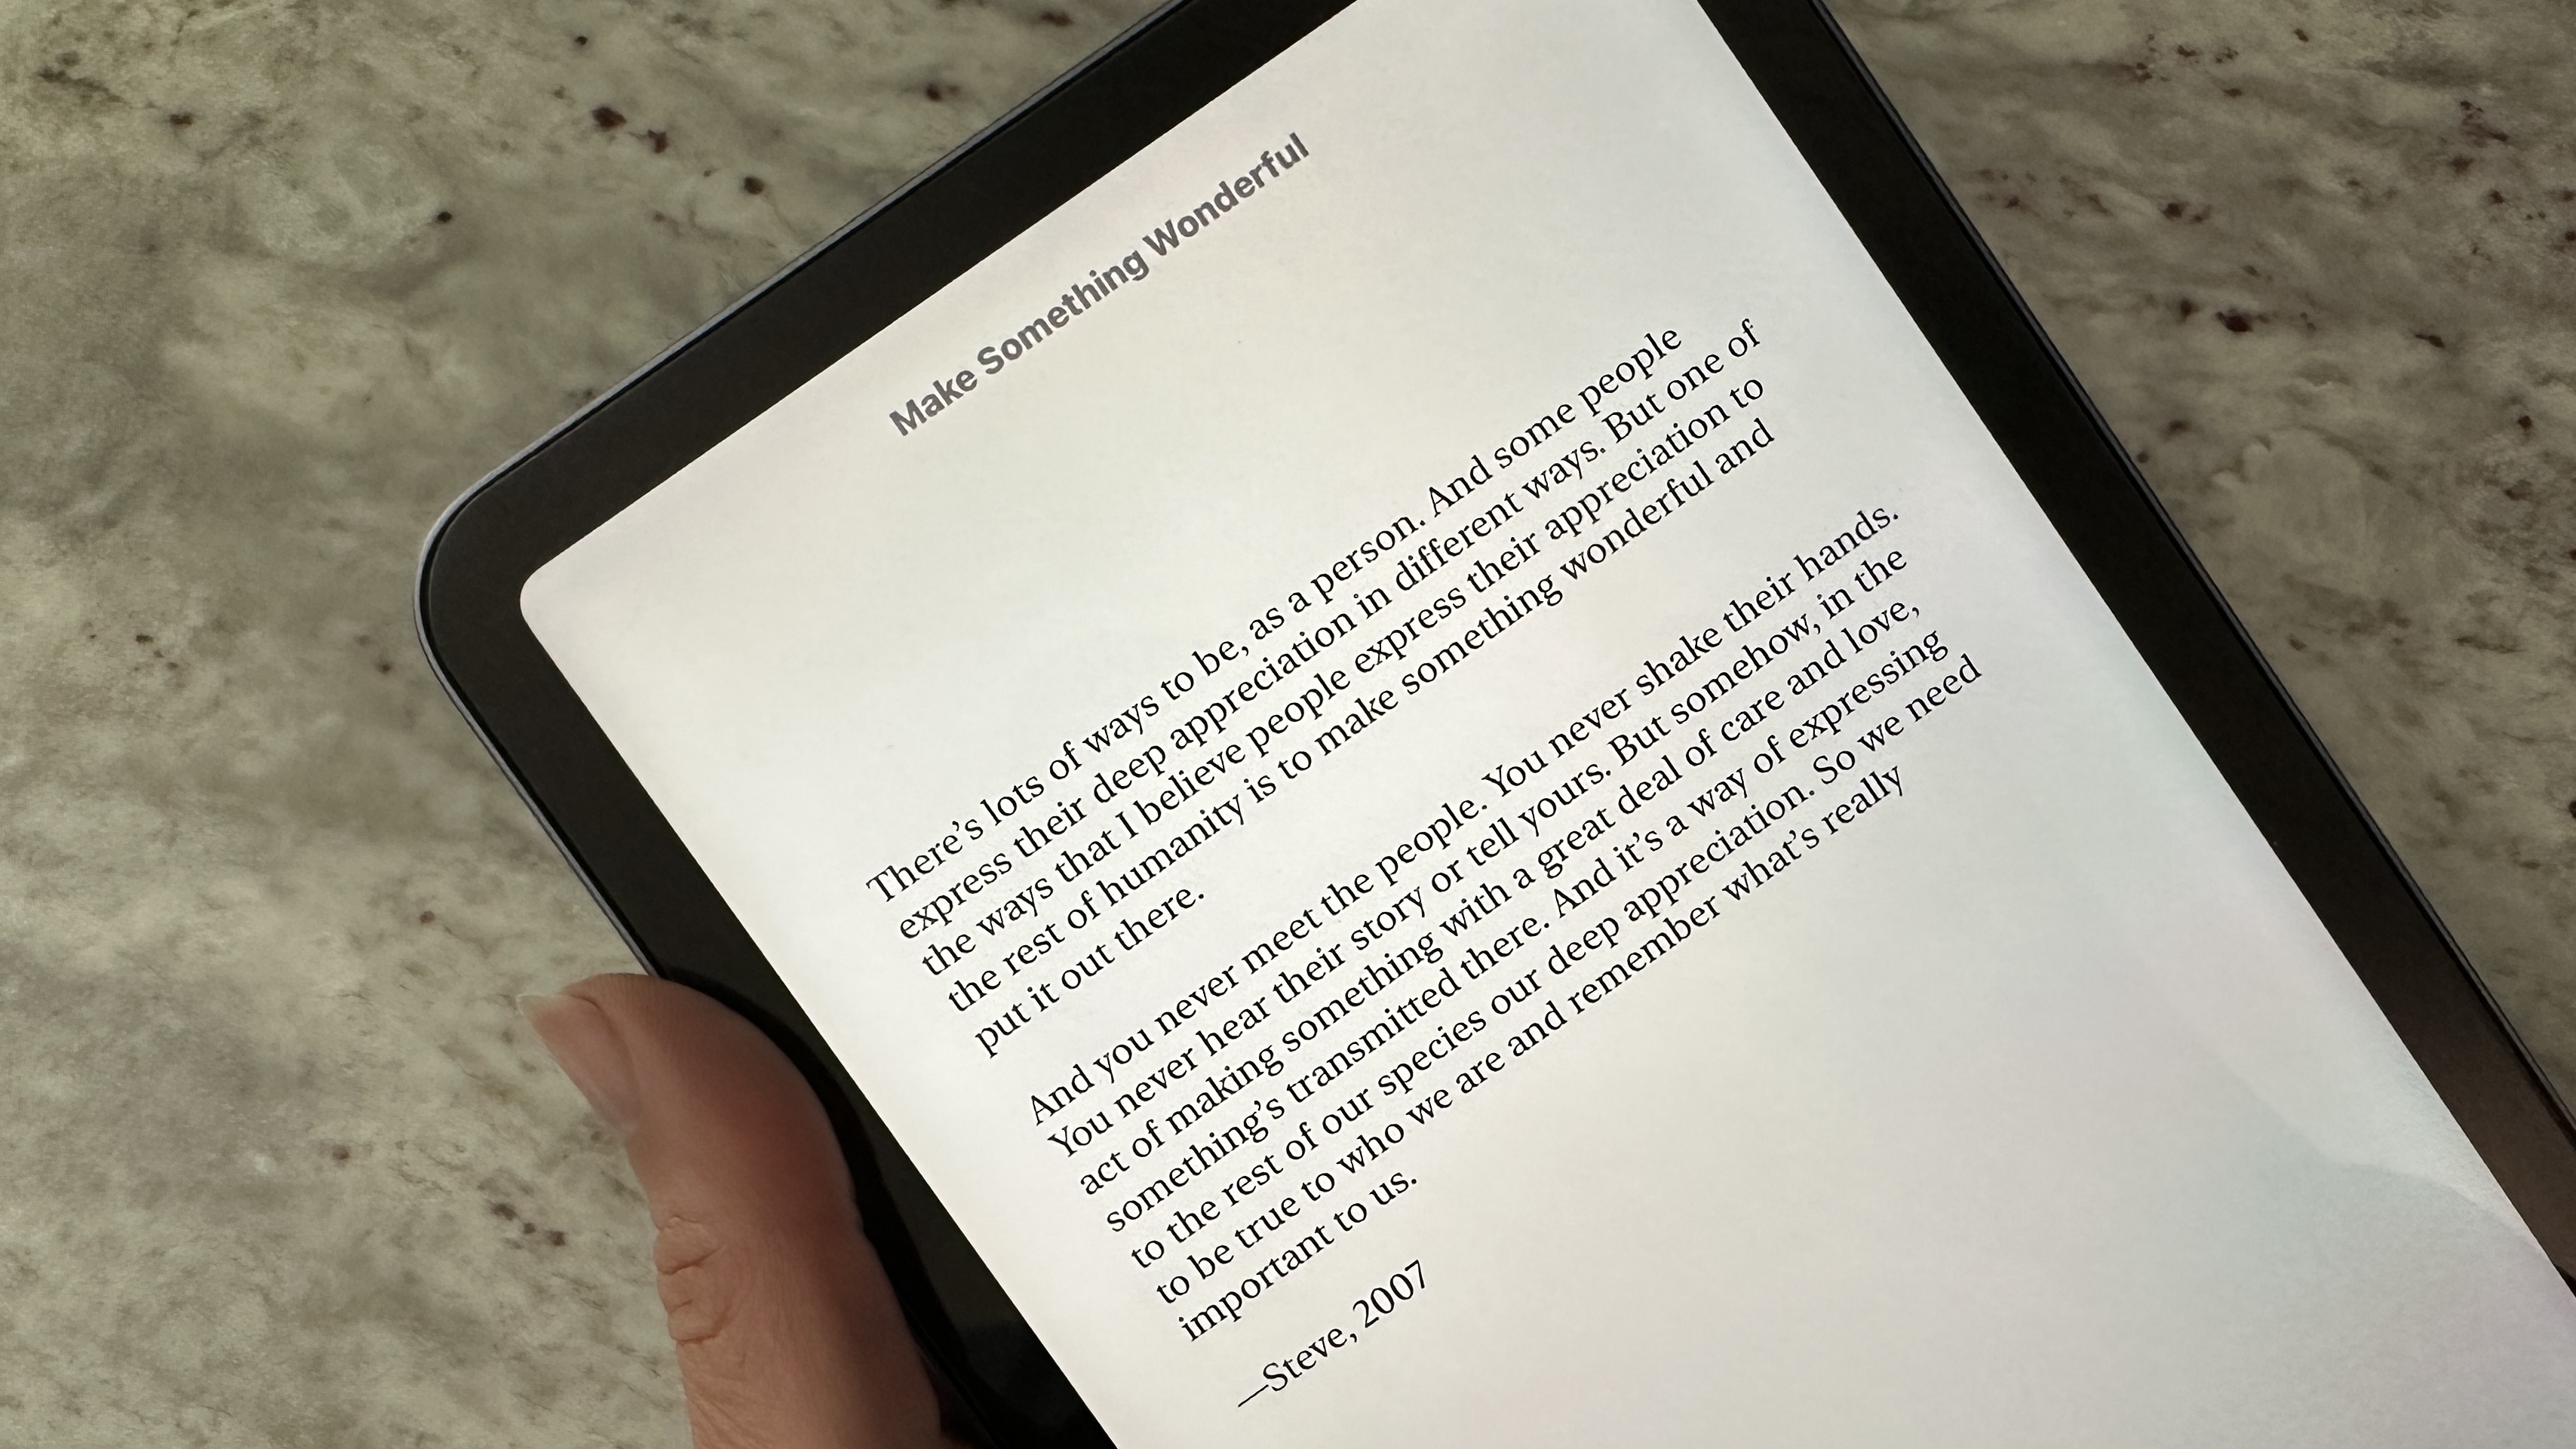 The Best Ereaders for 2024